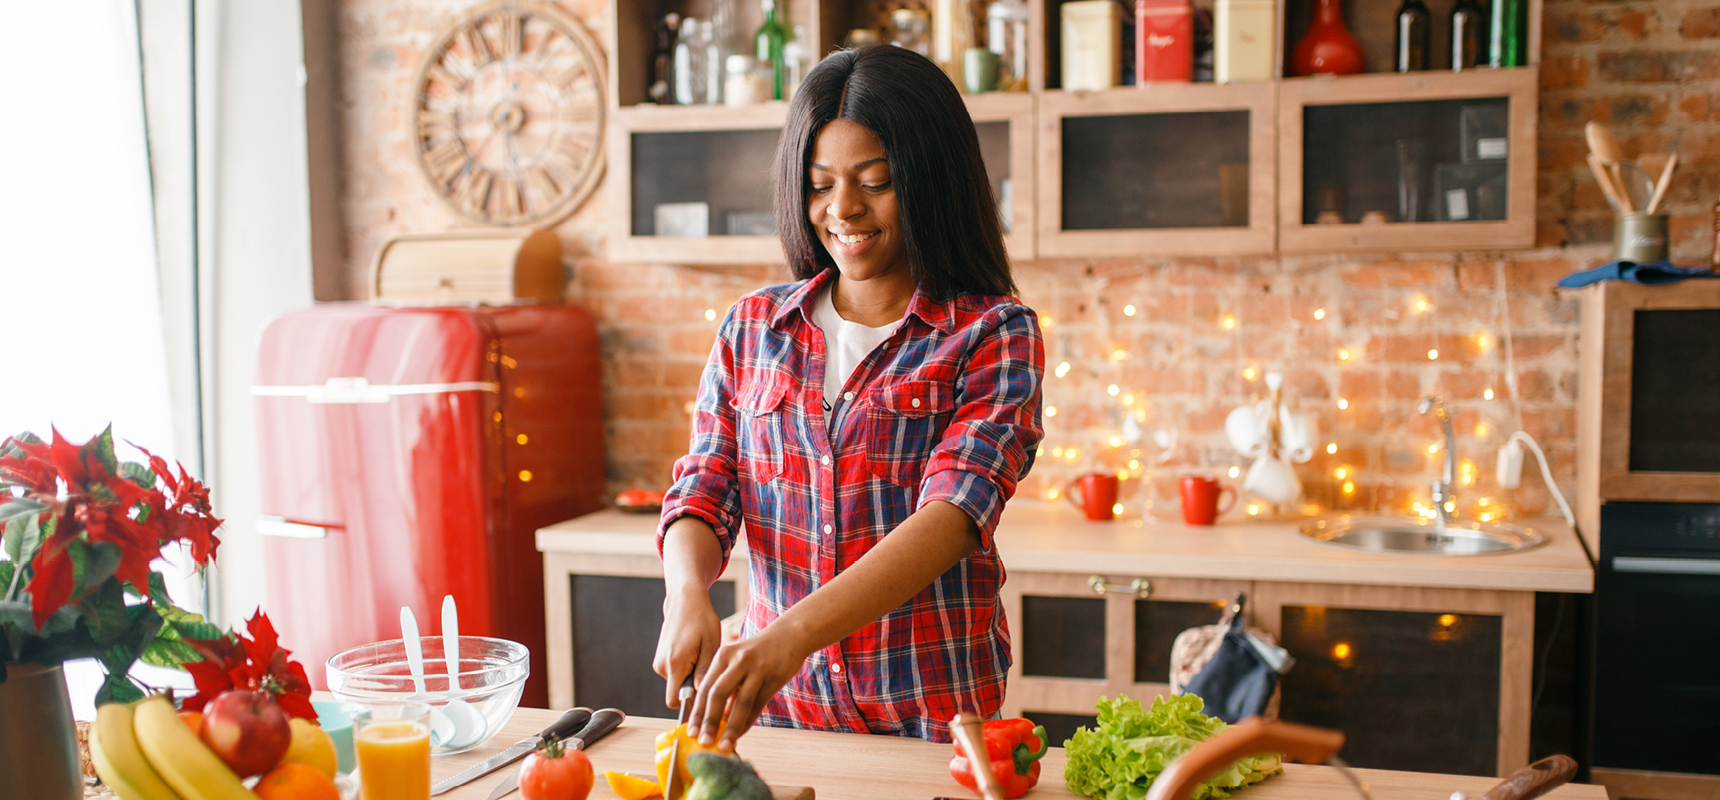 Smiling African American woman cooking healthy food in kitchen